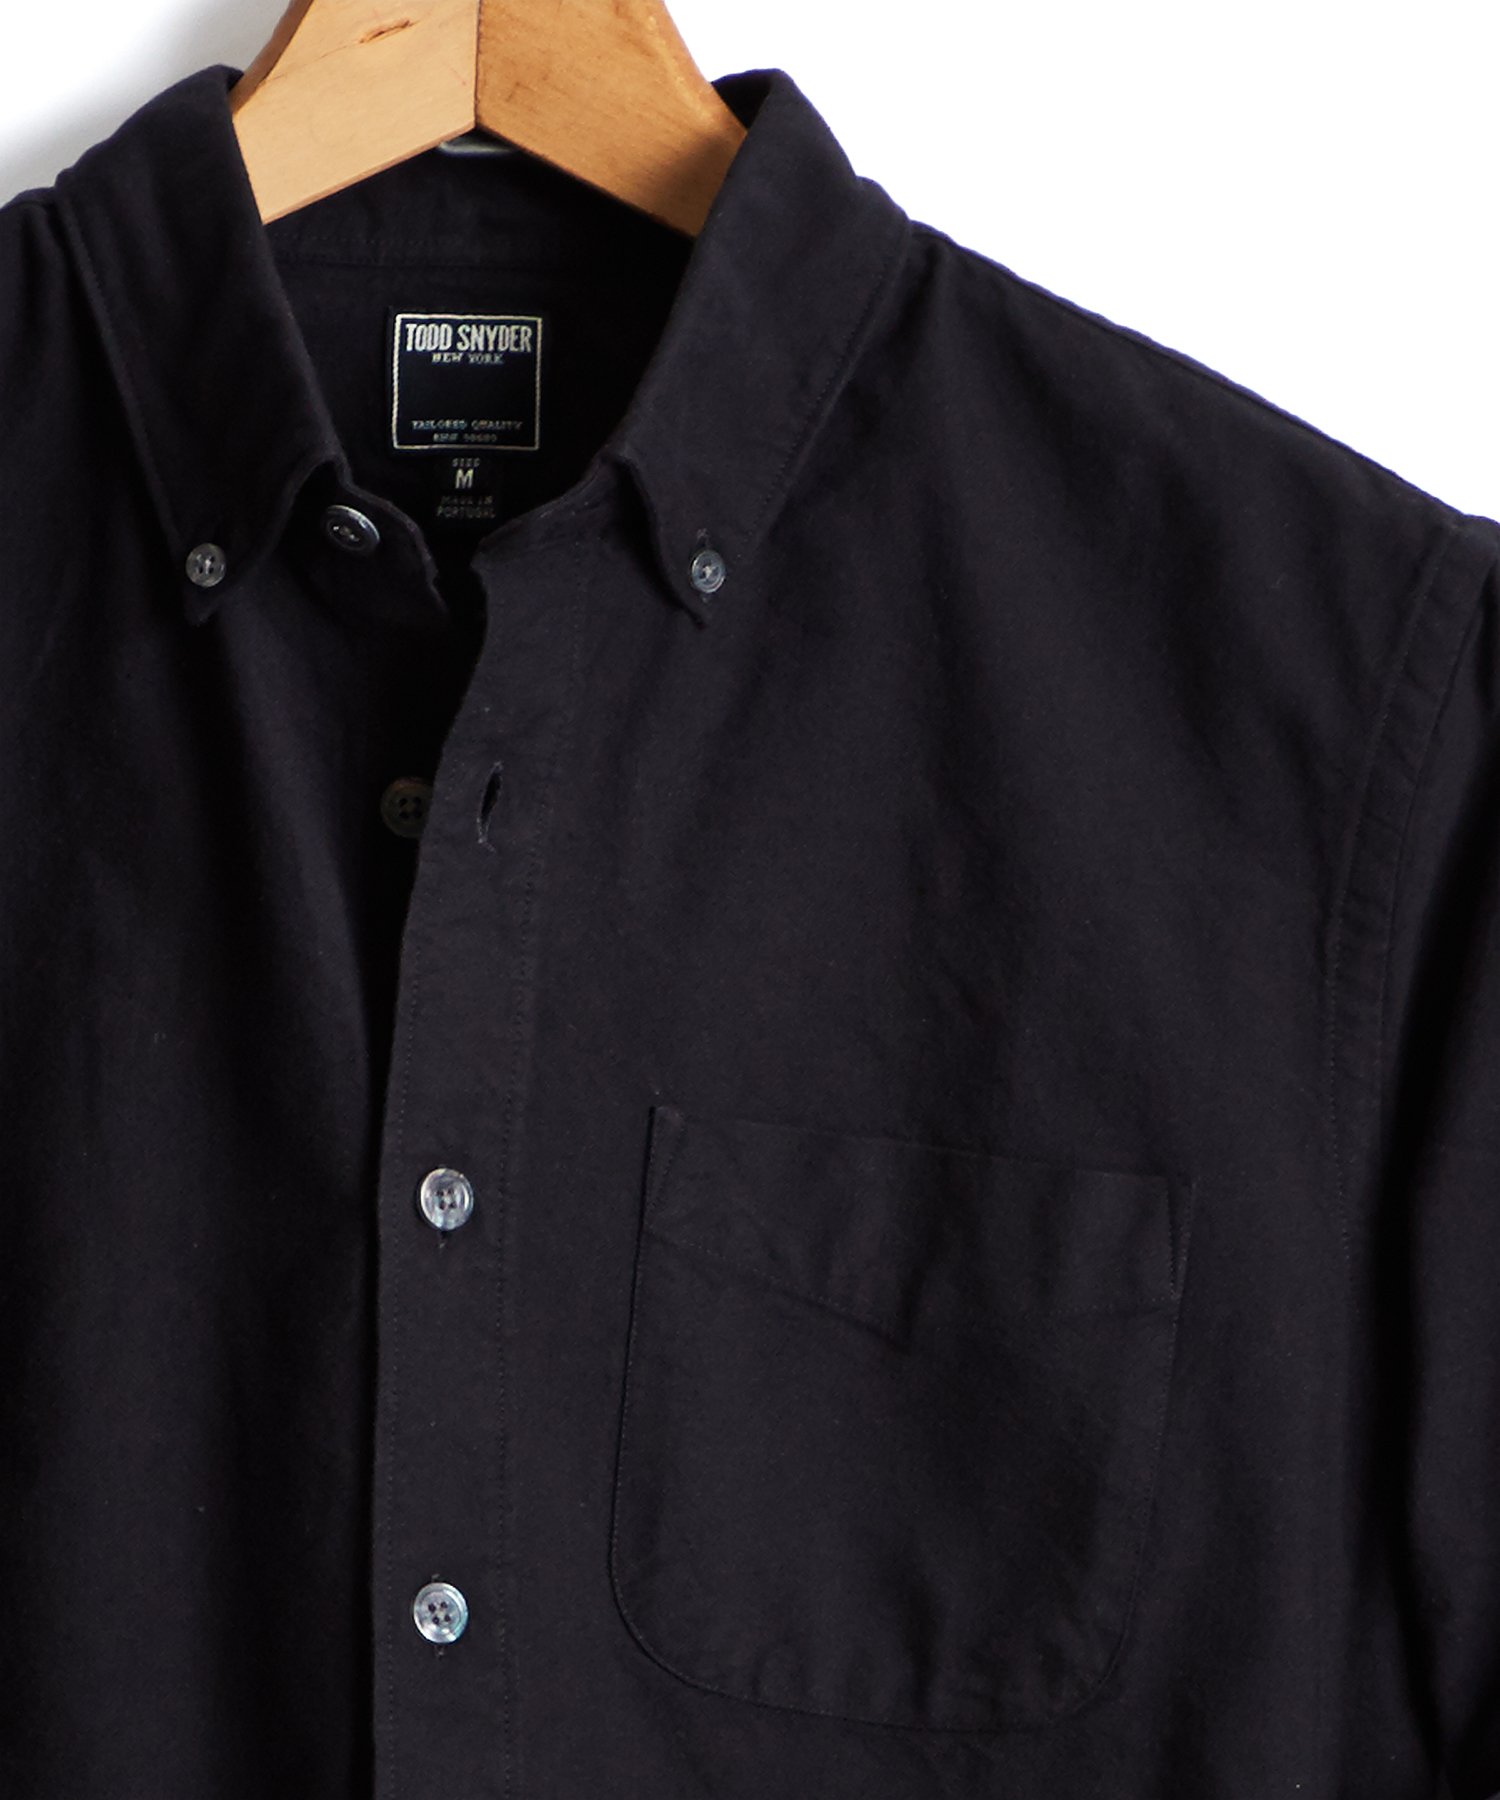 Japanese Selvedge Oxford Button Down Shirt in Black | The Fashionisto